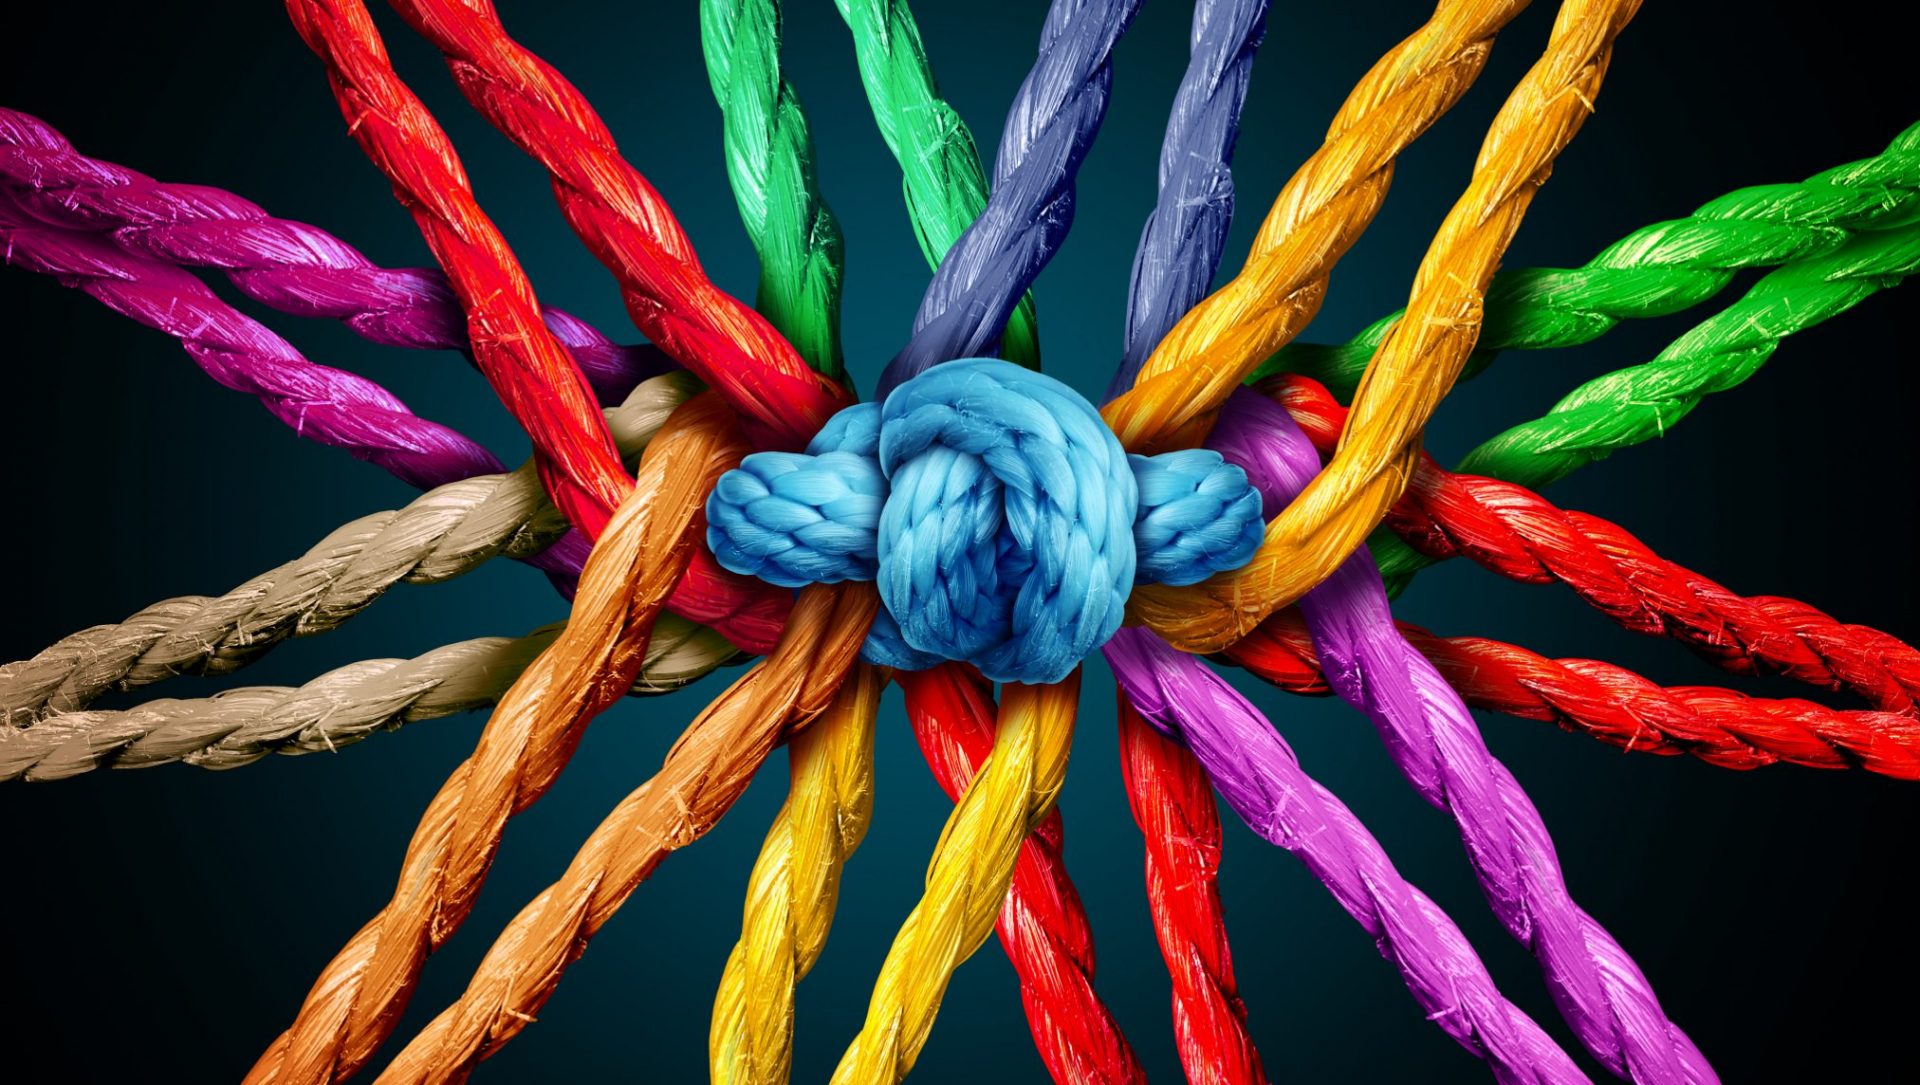 Knot made with multicolour ropes to represent cocreation